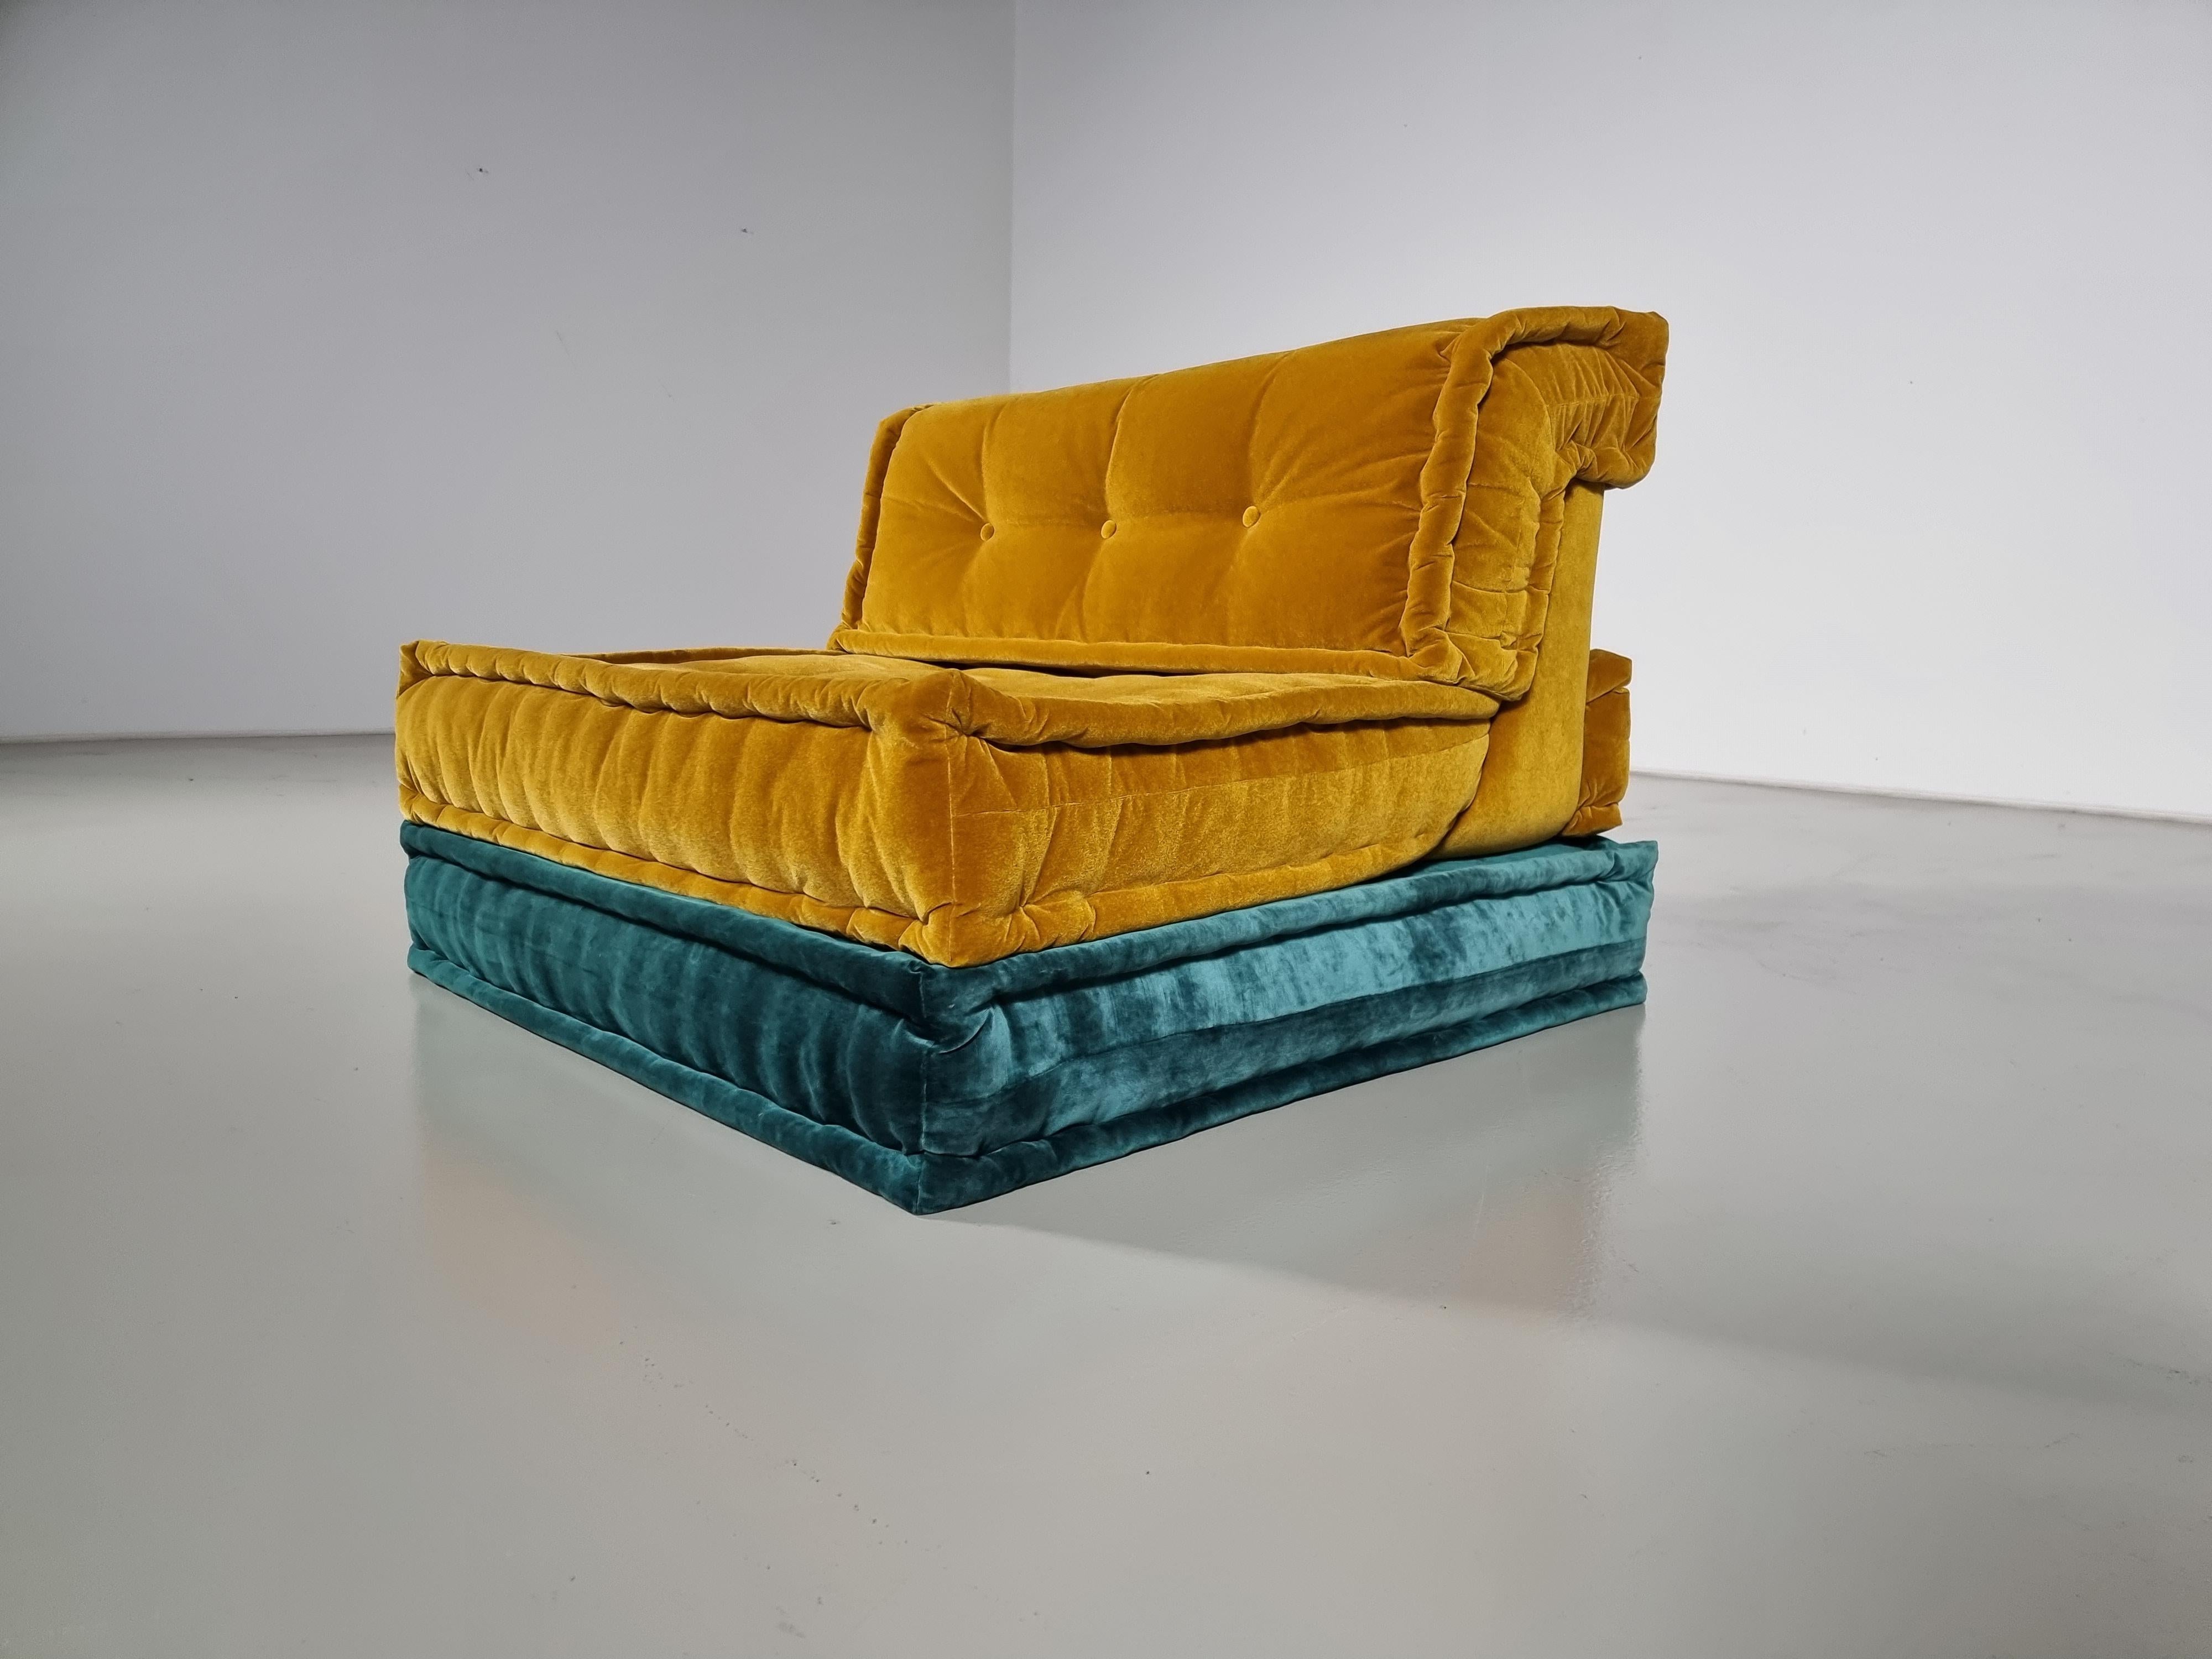 Mah Jong lounge chair in yellow and blue velvet by Hans Hopfer, designed in 1971 for Roche Bobois.

Hopfer’s Mah Jong is one of the most iconic midcentury seating designs and the striking, luxurious textile from Missoni truly takes it to the next